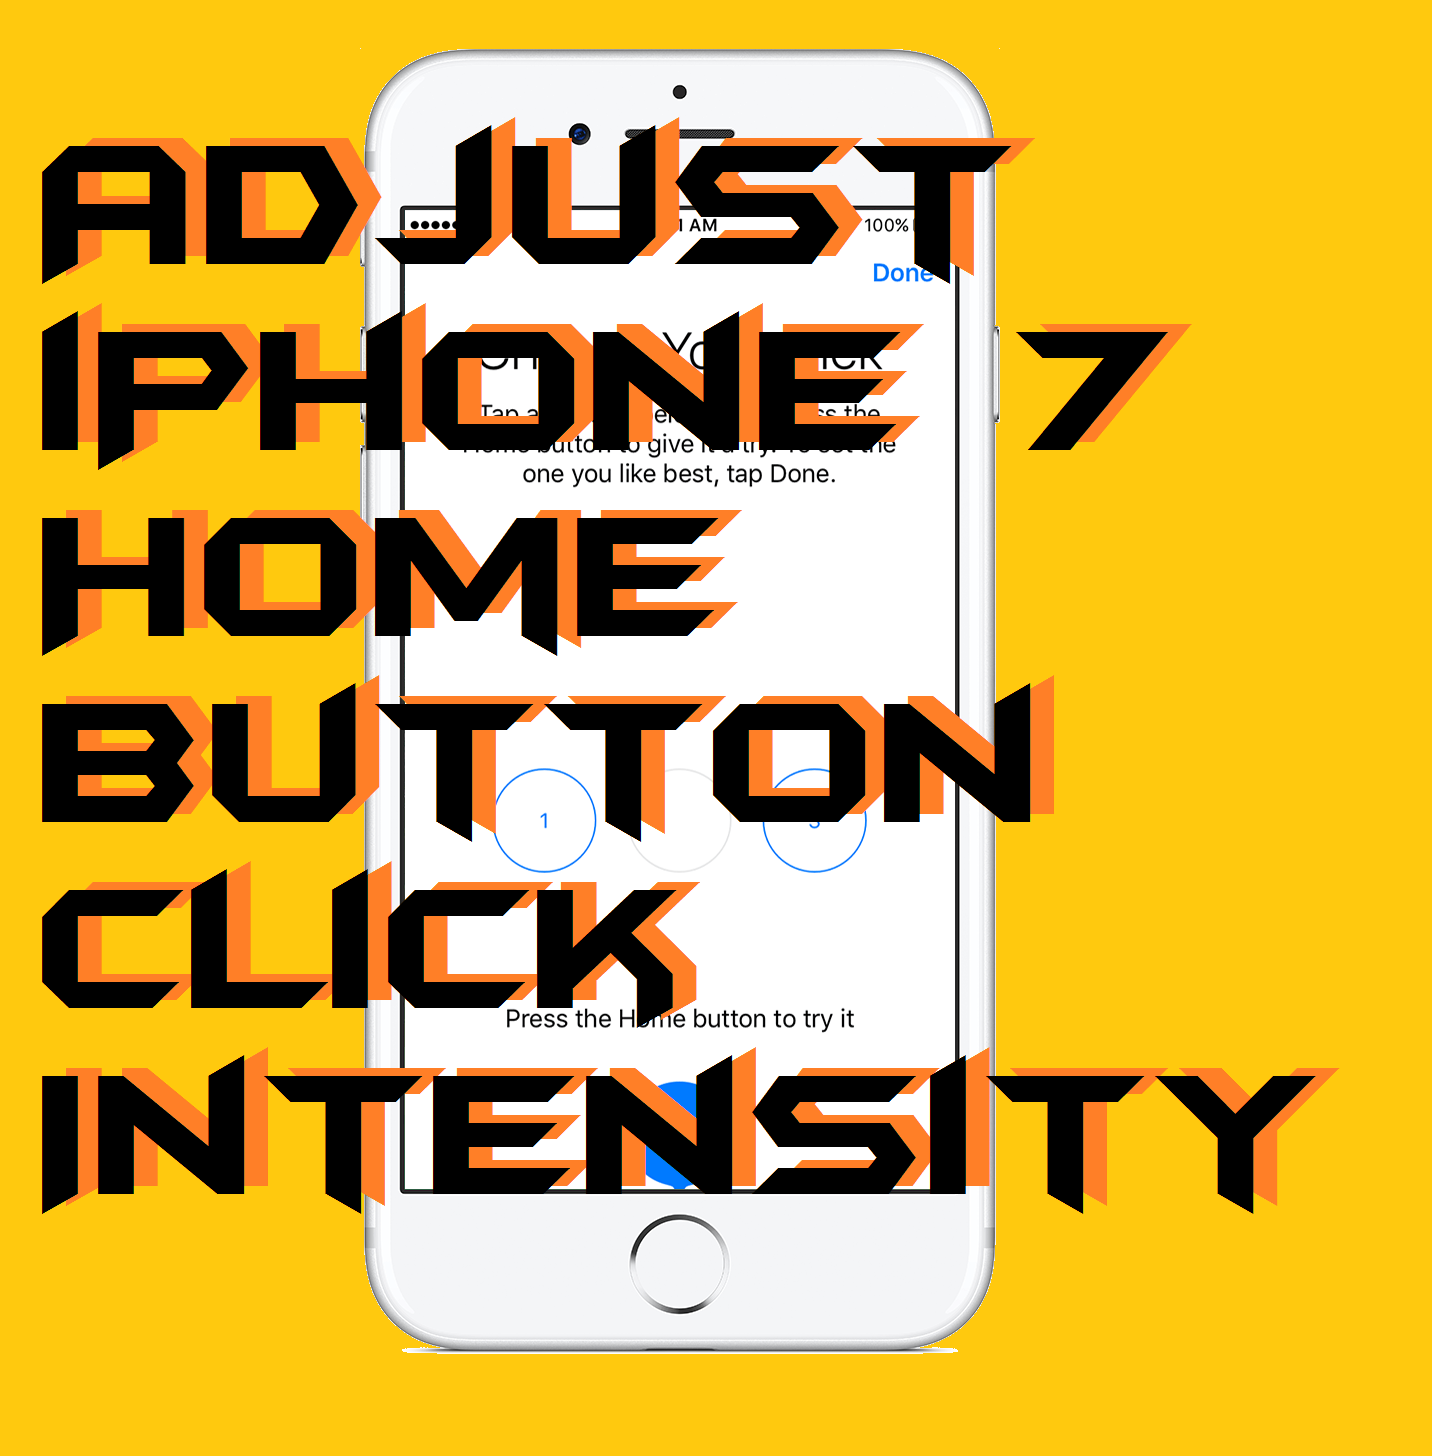 How to Adjust iPhone 7 Home Button Click Intensity